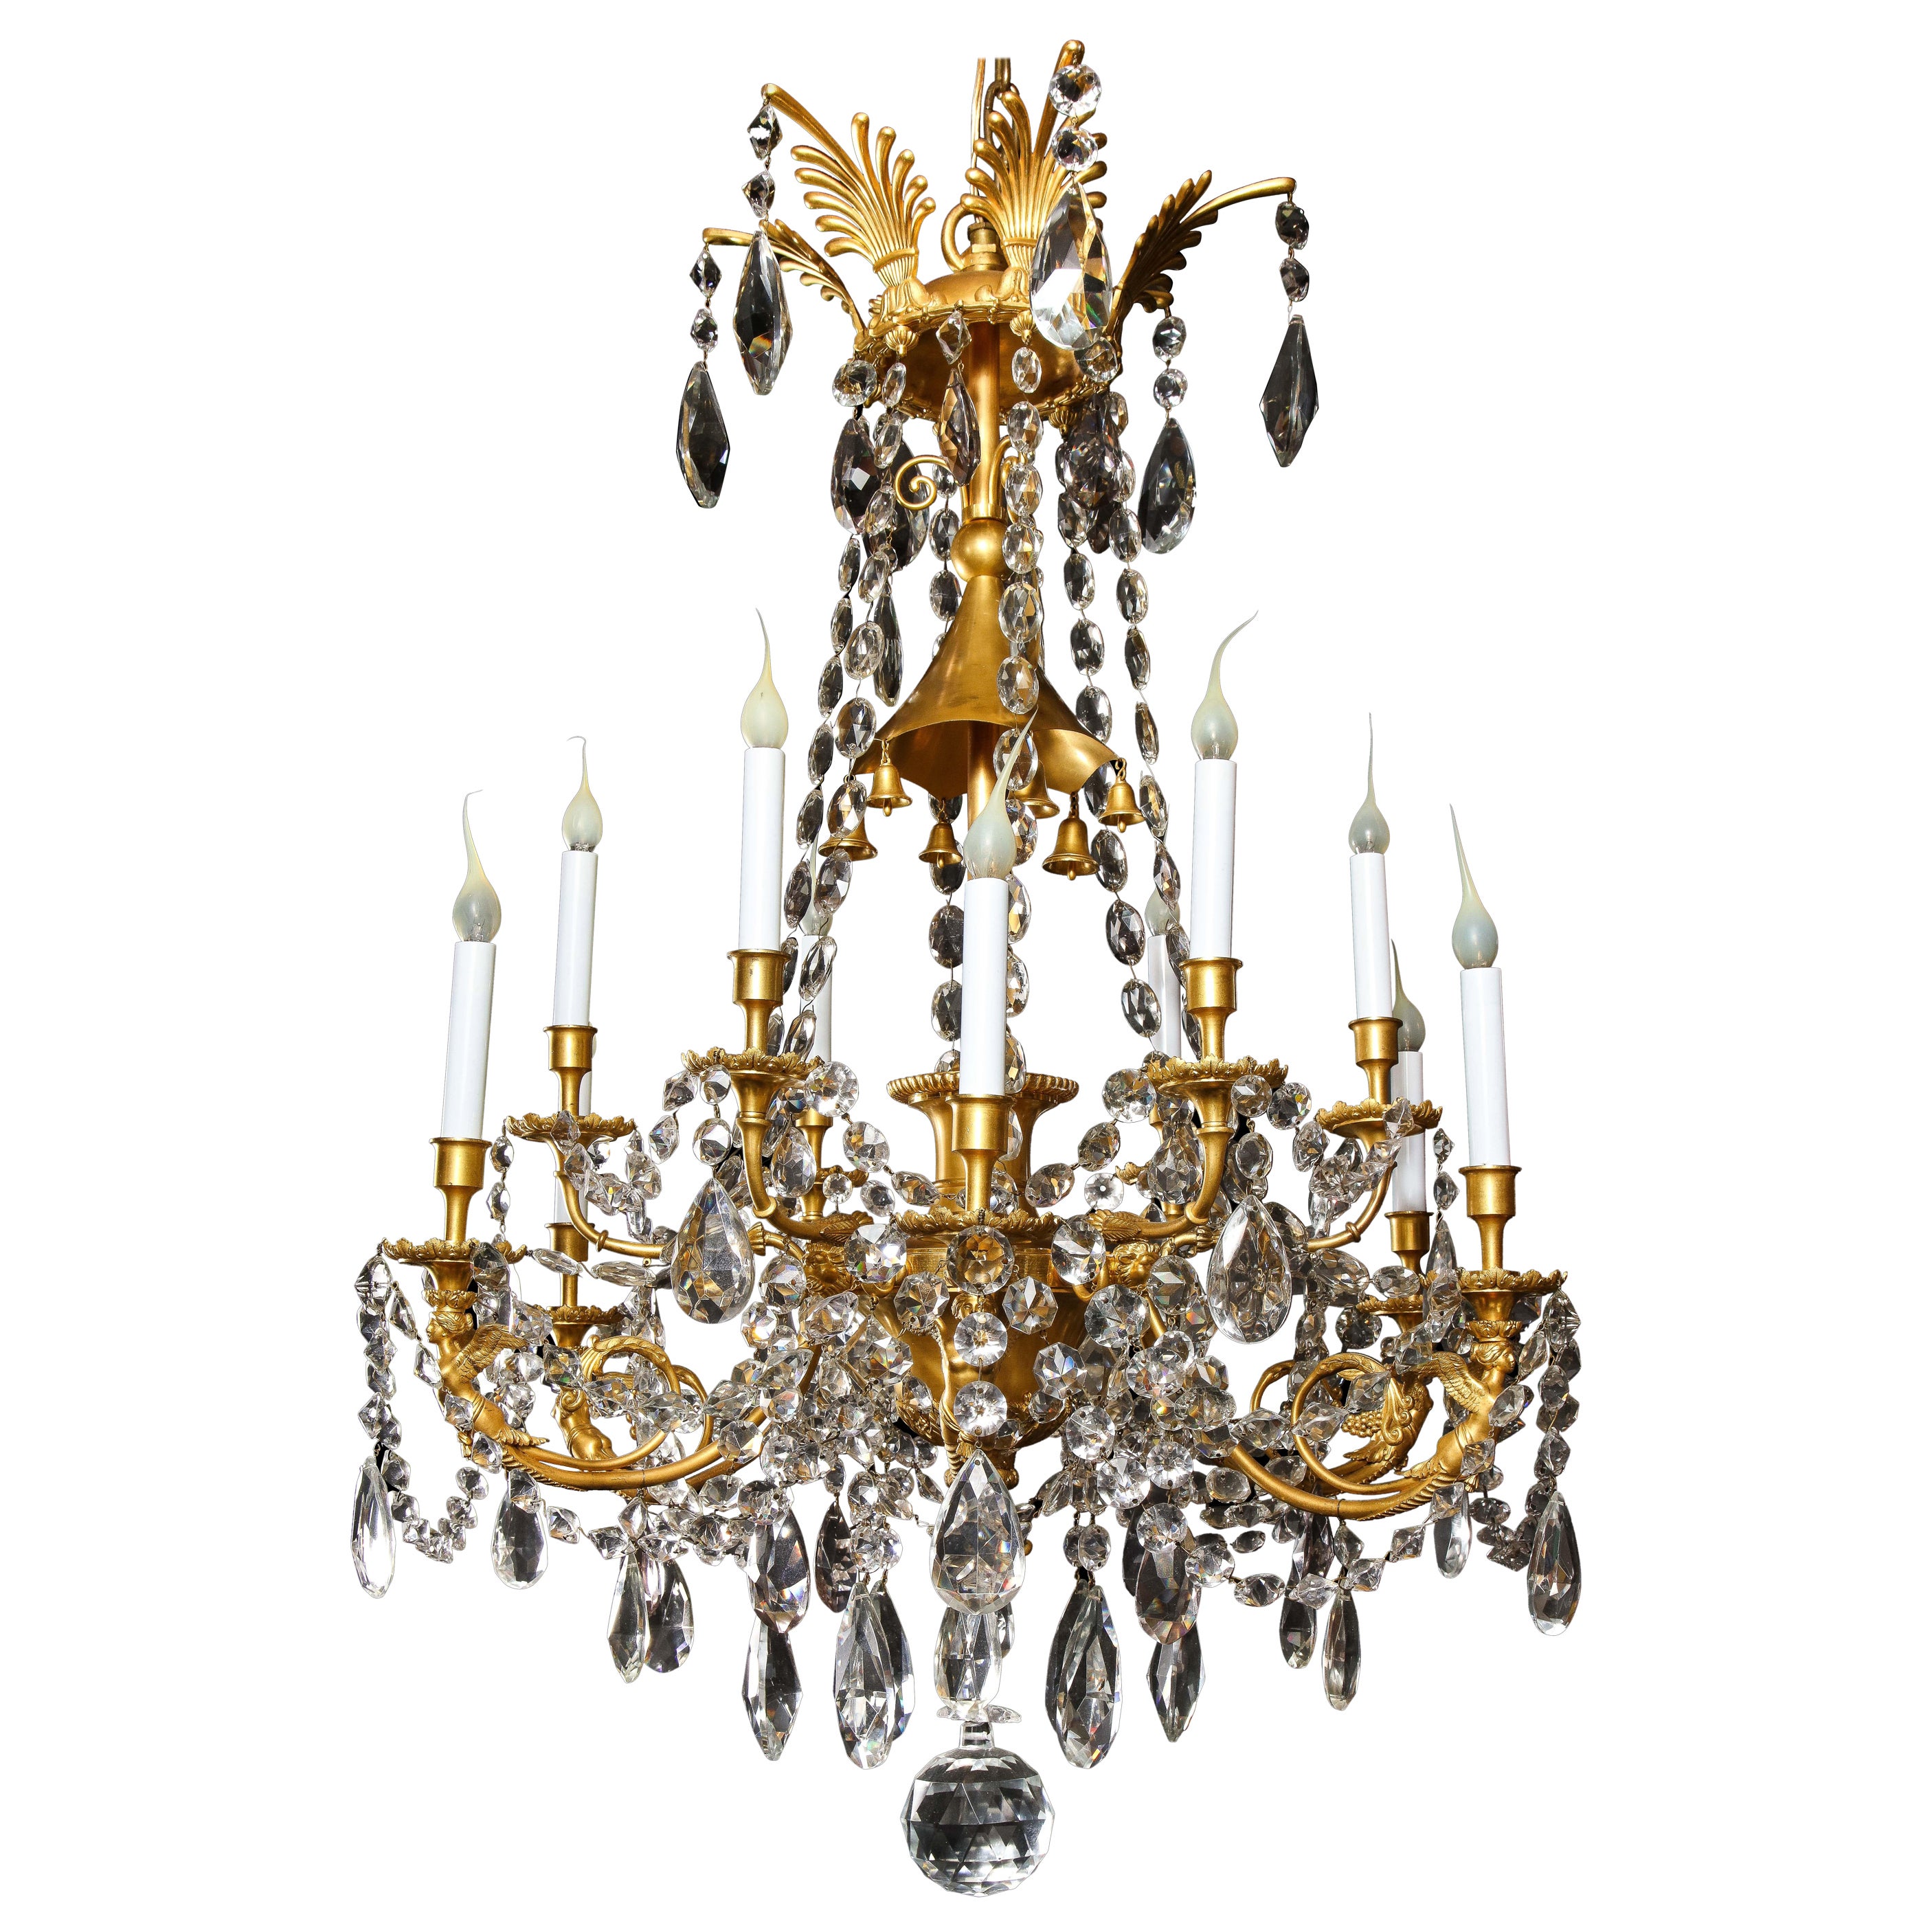 Spectacular Antique French Louis XVI Style Gilt Bronze and Crystal Chandelier For Sale